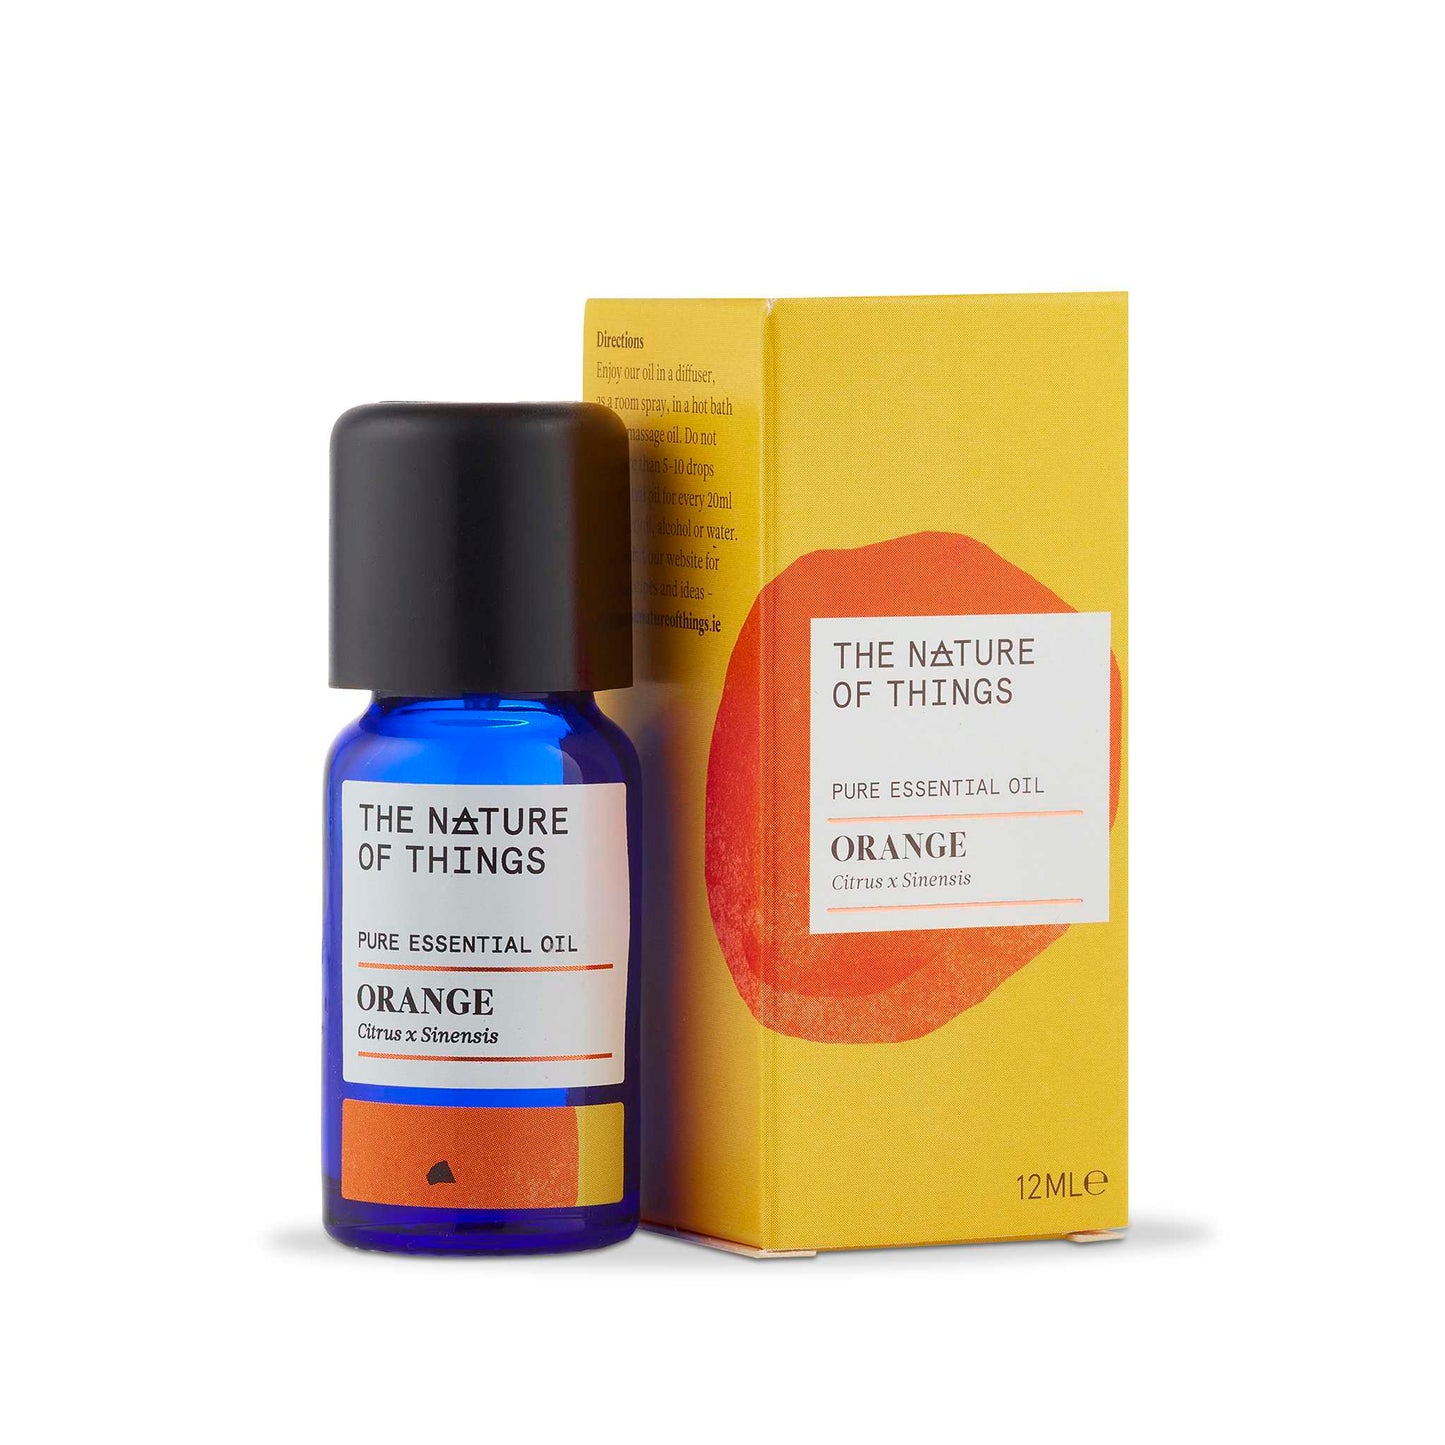 The Nature of Things Essential Oil Orange Essential Oil 12ml - The Nature of Things